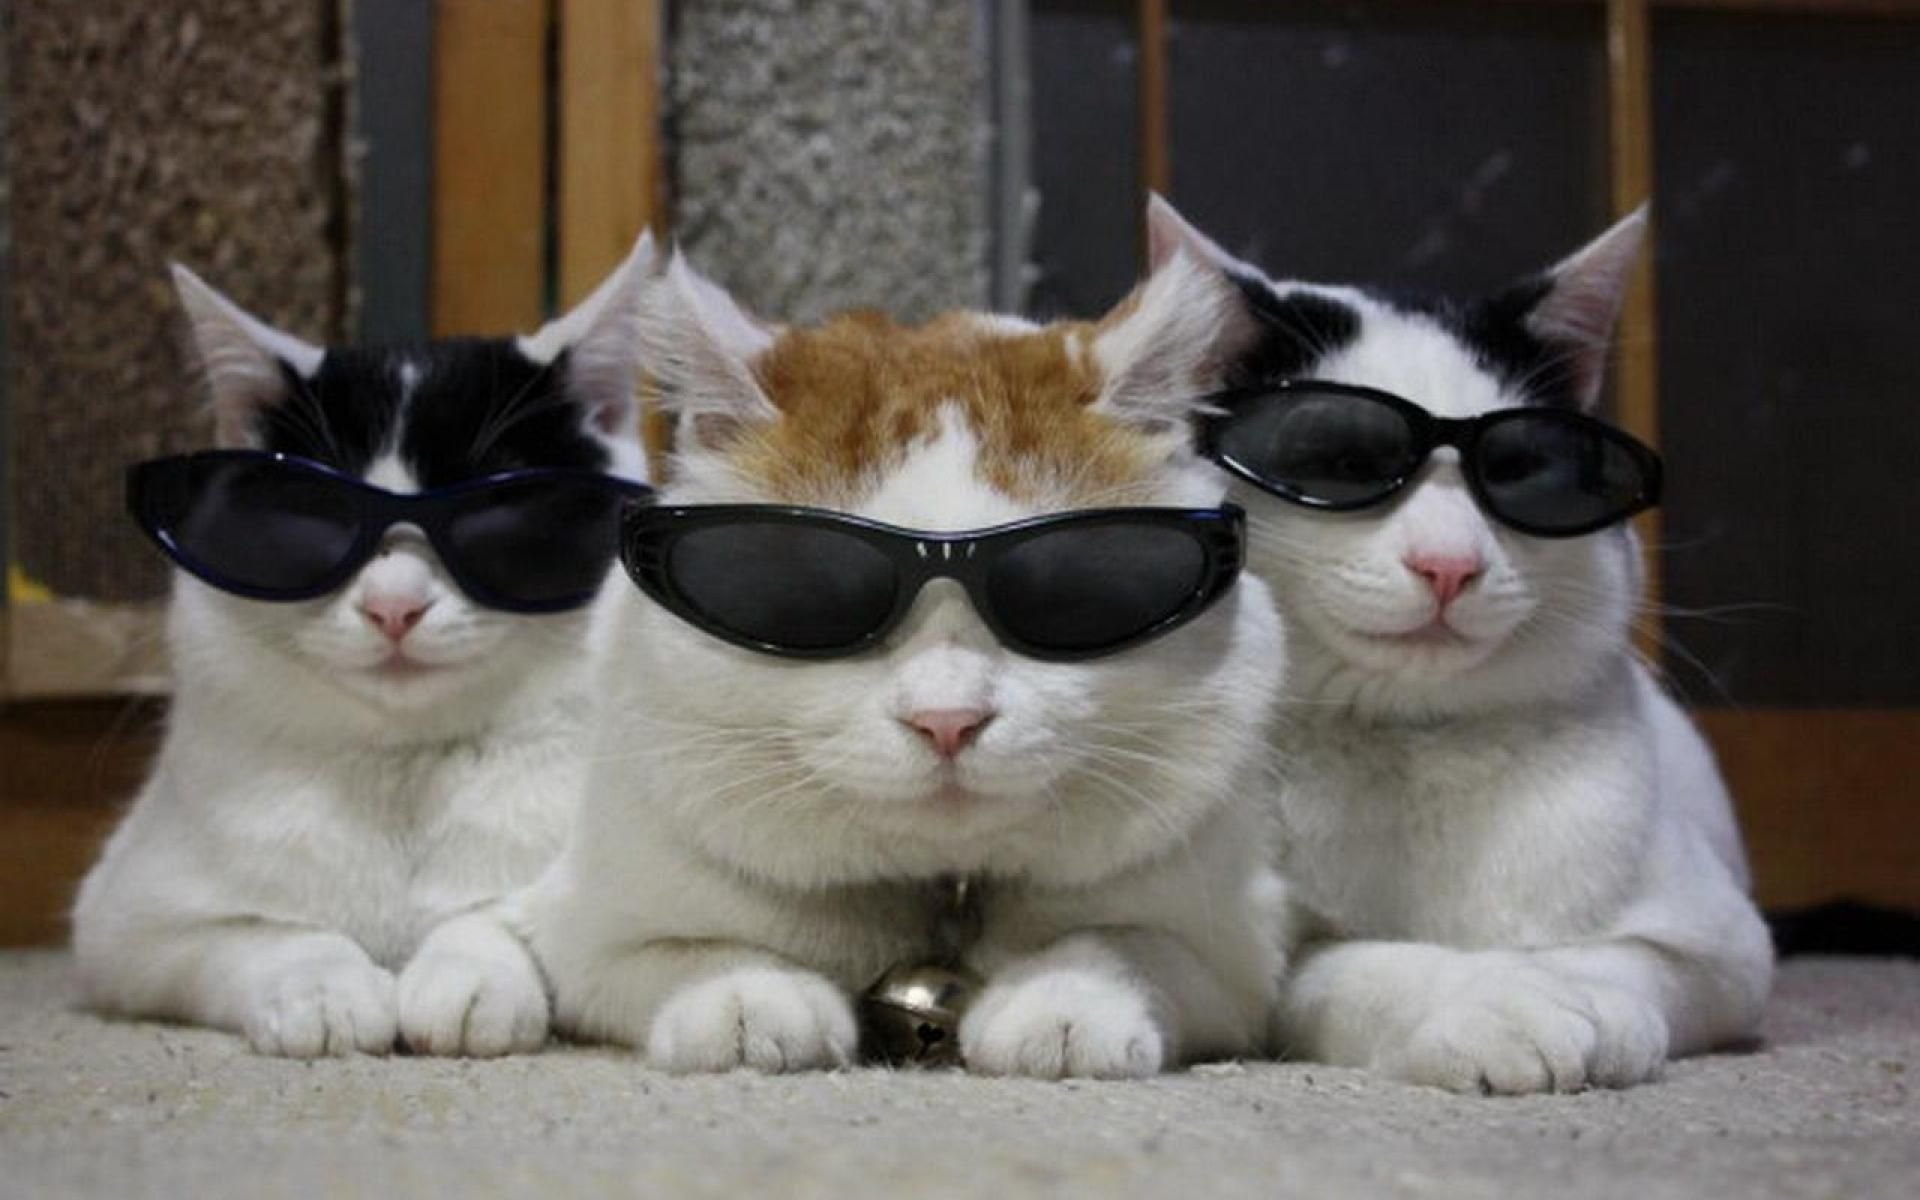 Image ID: 291016. cats on vacation - playing it cool Animal Cat Cats Image....